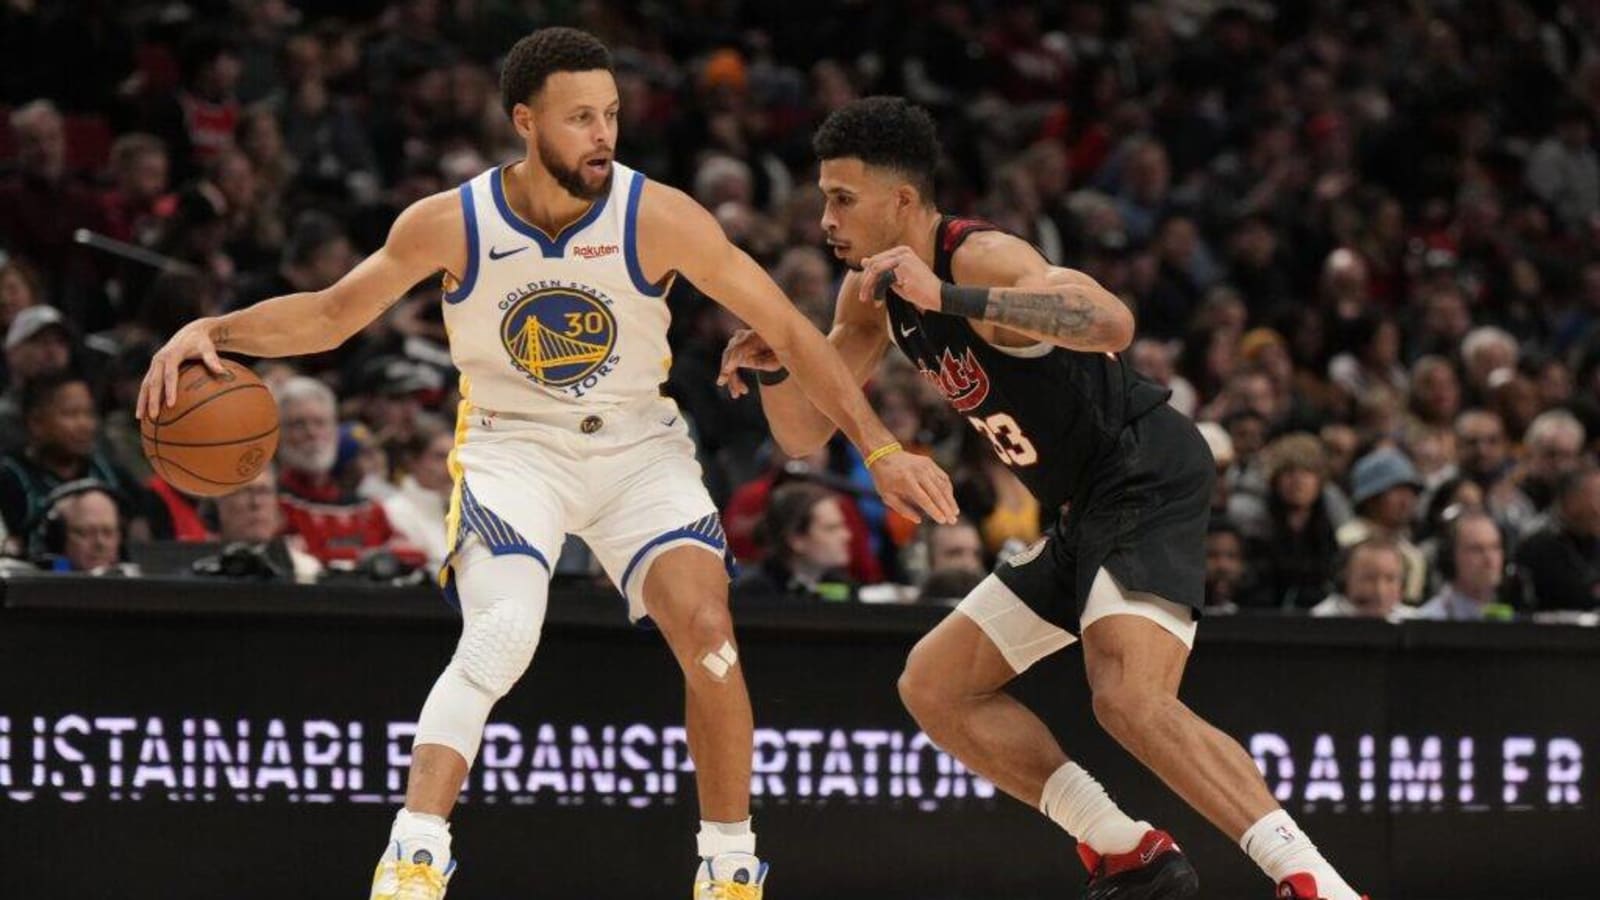 Golden State Warriors Rumors: General Manager Mike Dunleavy Jr. Believes Dubs Roster Has Championship Pedigree, But Changes Could Come